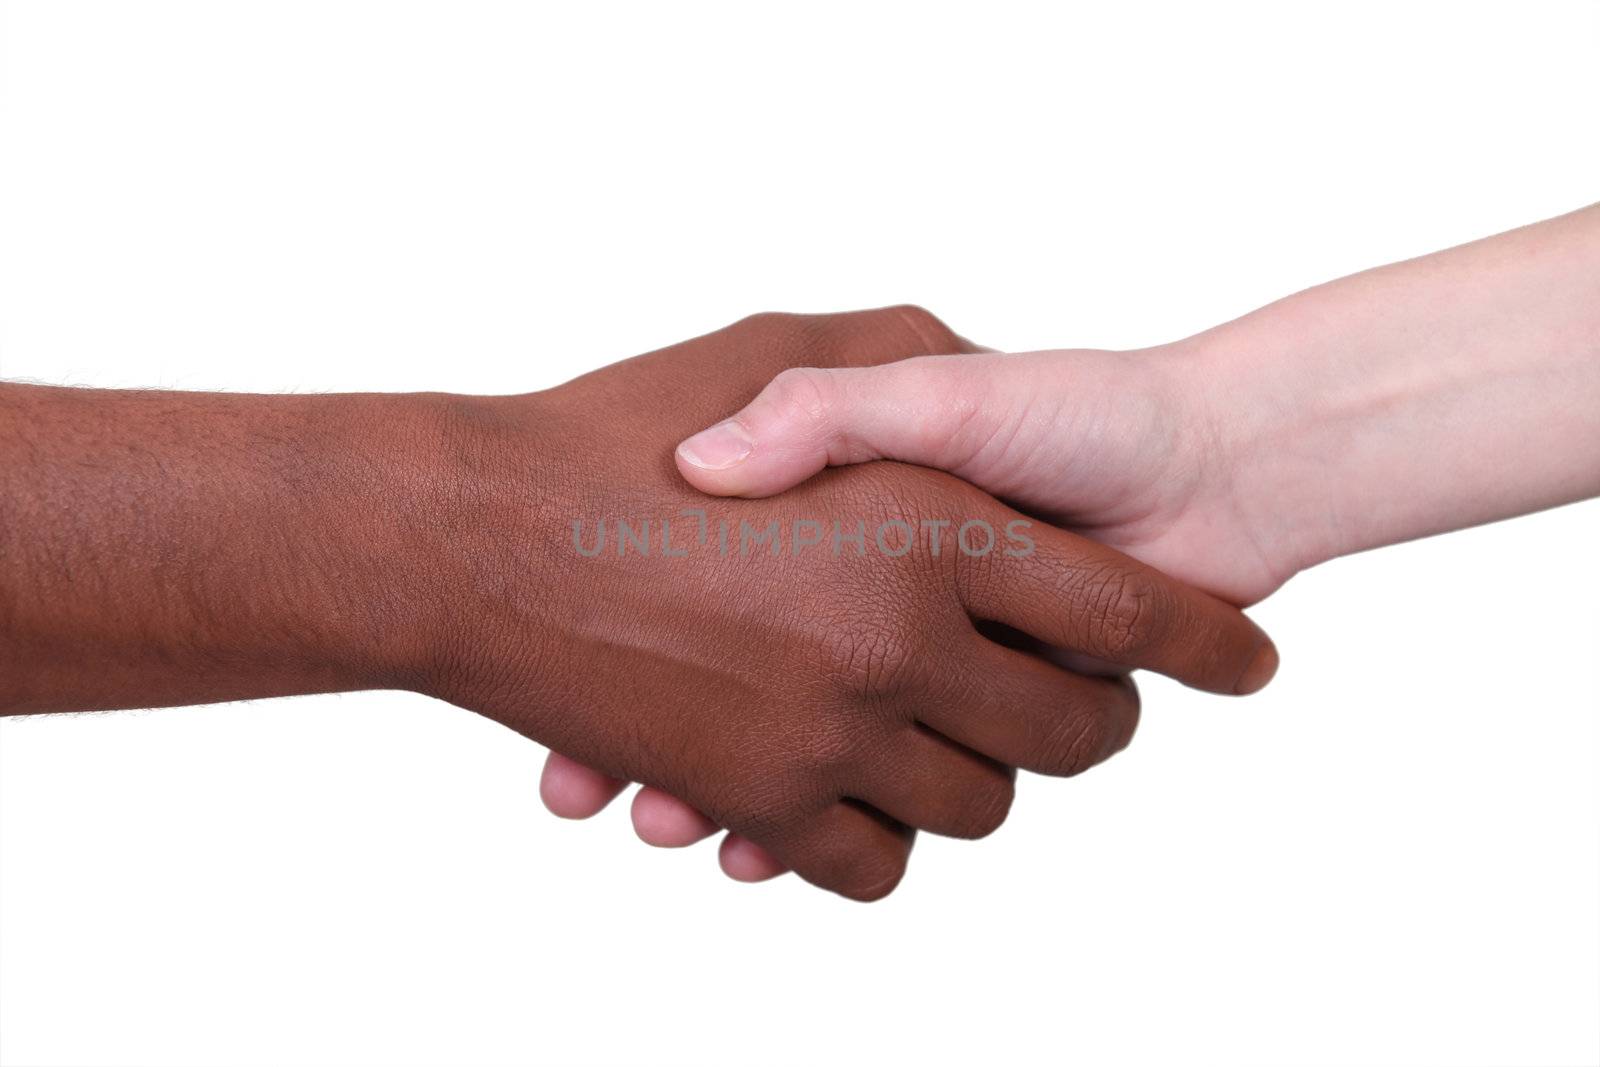 Metis person and white person shaking hands by phovoir